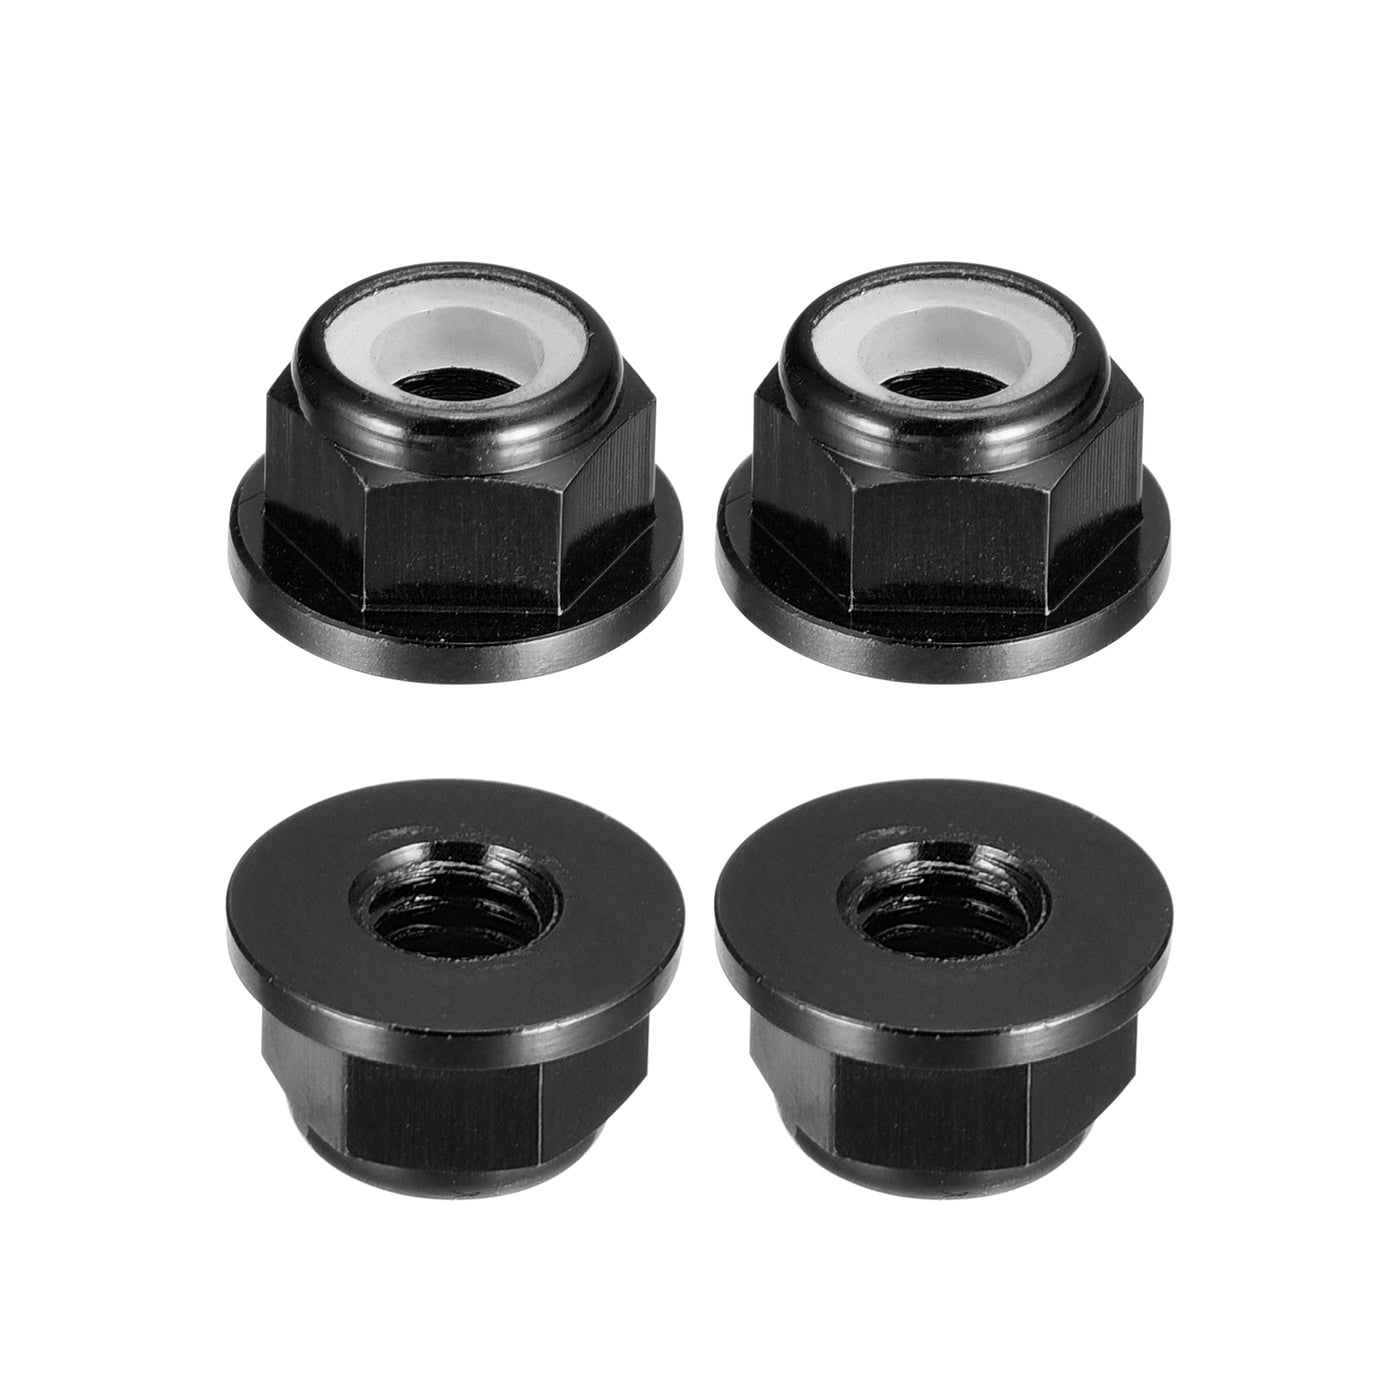 uxcell Uxcell Nylon Insert Hex Lock Nuts, 4pcs - M4 x 0.7mm Aluminum Alloy Self-Locking Nut, Anodizing Flange Lock Nut for Fasteners (Black)